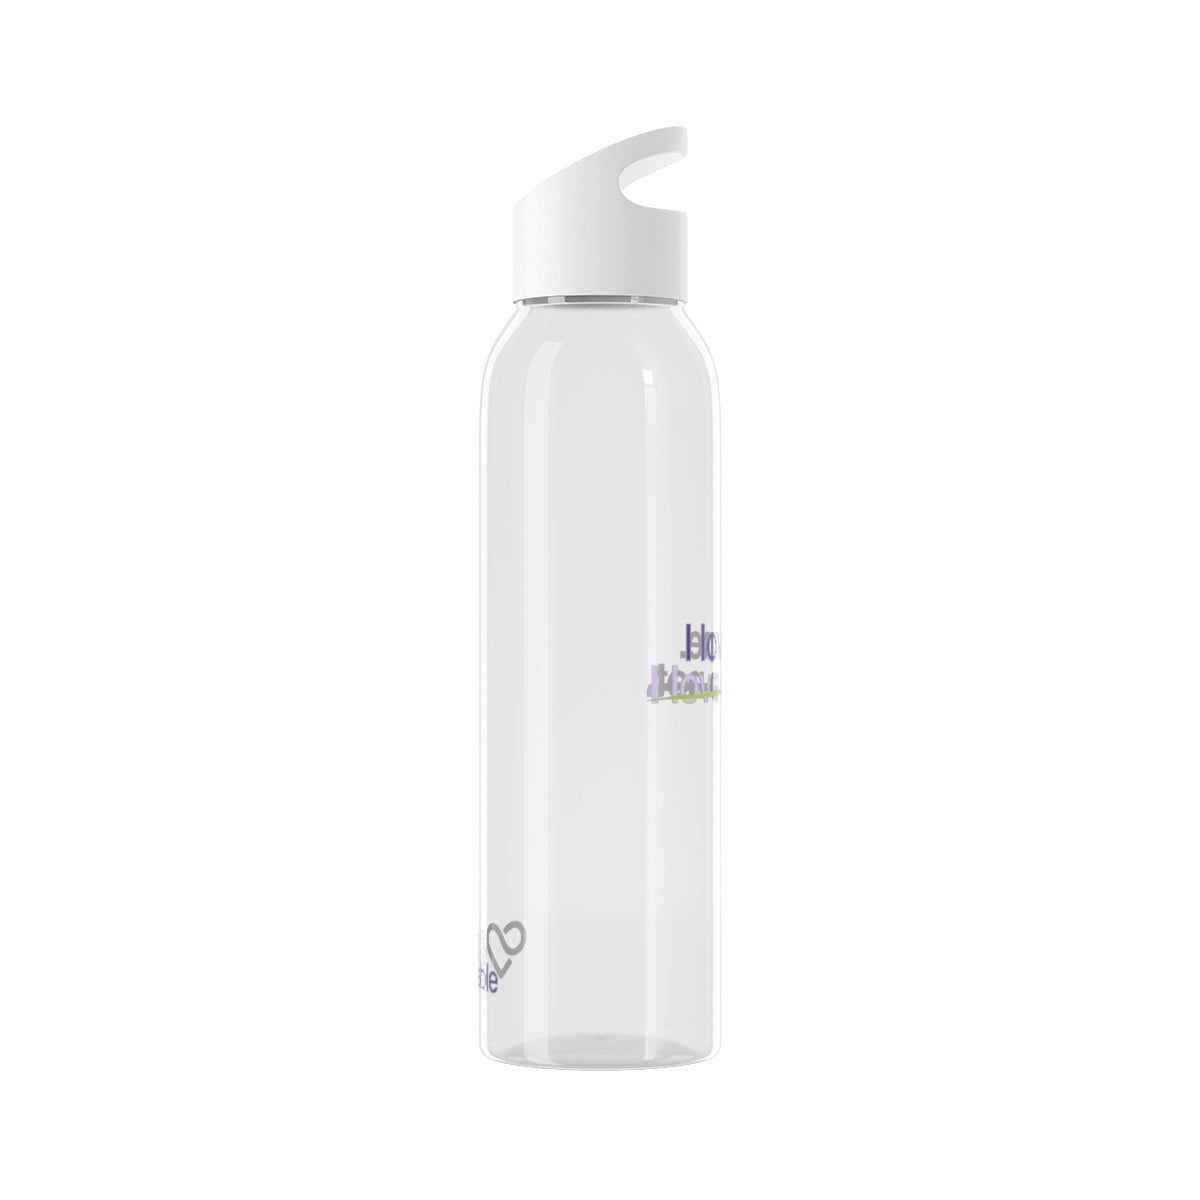 Simply Lovable "I Love Me" Water Bottle